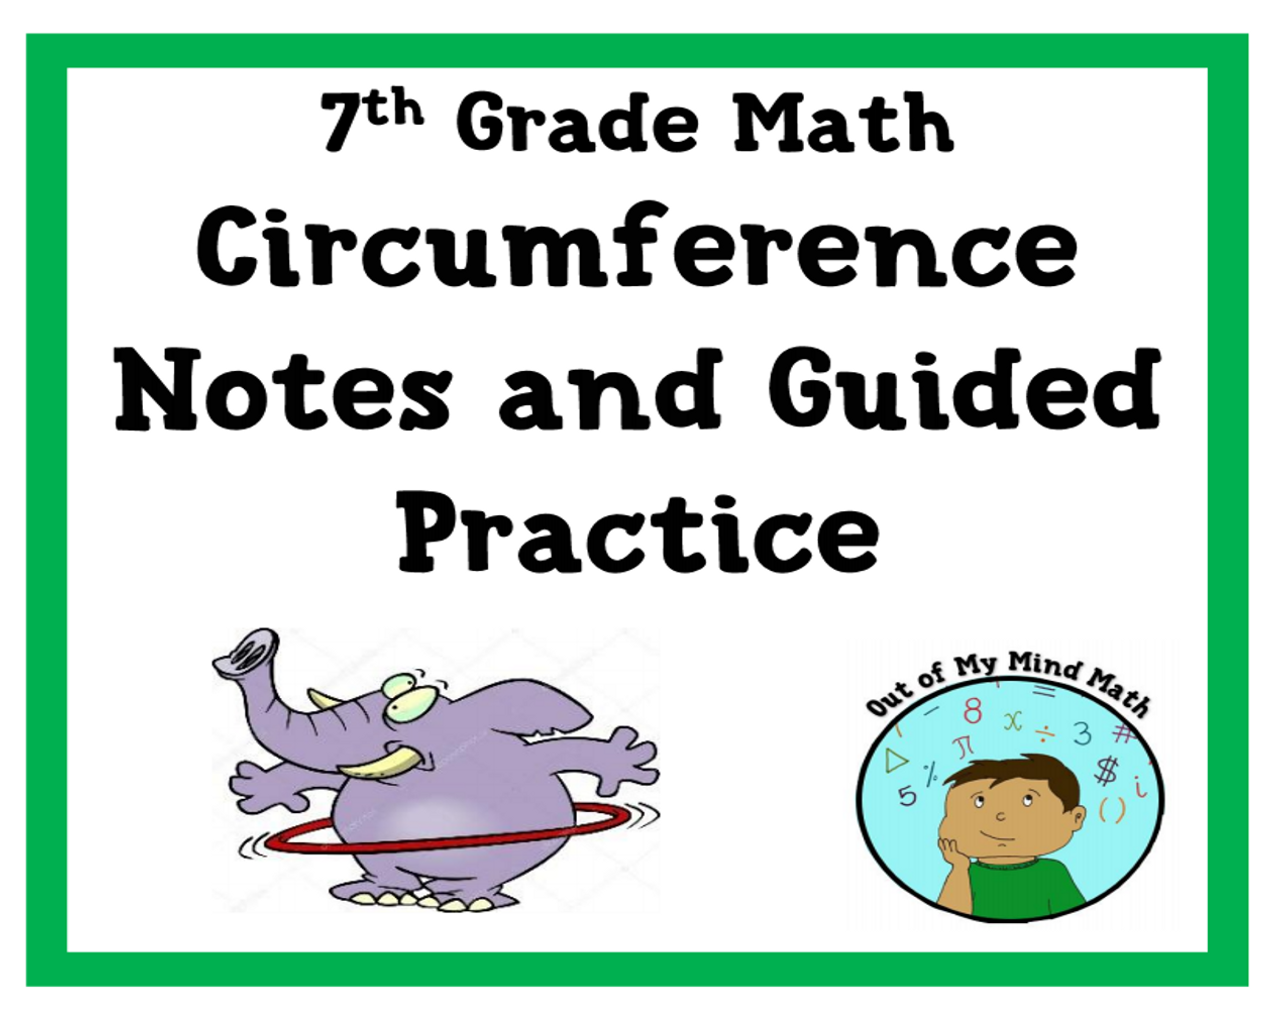 Circumference Notes & Guided Practice